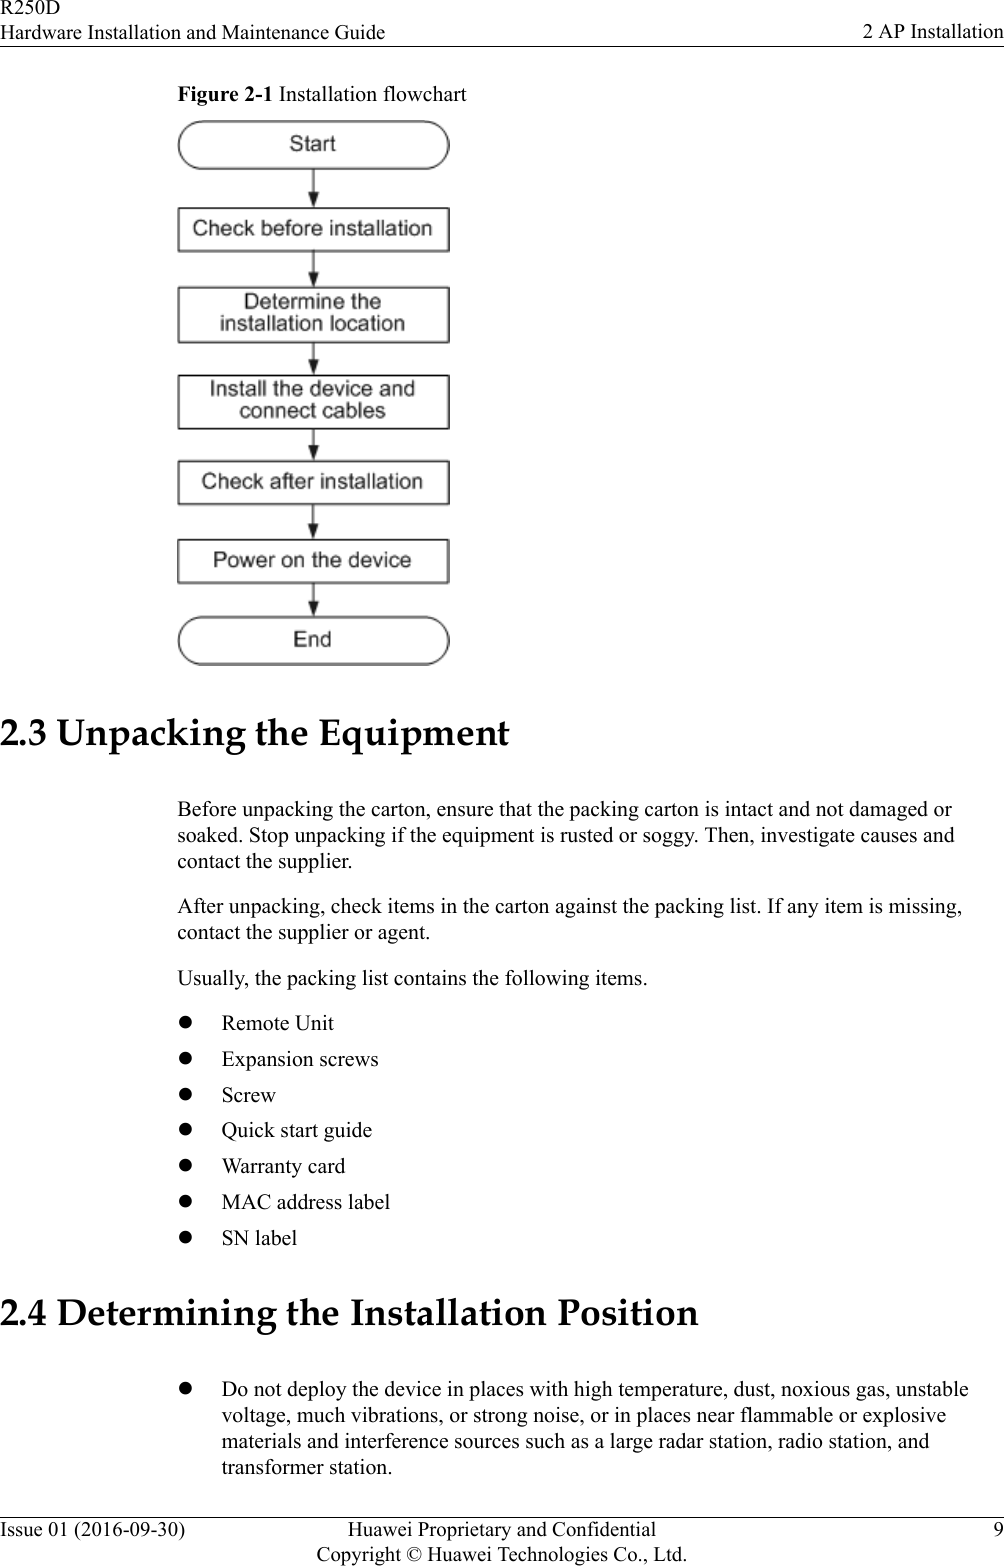 Figure 2-1 Installation flowchart2.3 Unpacking the EquipmentBefore unpacking the carton, ensure that the packing carton is intact and not damaged orsoaked. Stop unpacking if the equipment is rusted or soggy. Then, investigate causes andcontact the supplier.After unpacking, check items in the carton against the packing list. If any item is missing,contact the supplier or agent.Usually, the packing list contains the following items.lRemote UnitlExpansion screwslScrewlQuick start guidelWarranty cardlMAC address labellSN label2.4 Determining the Installation PositionlDo not deploy the device in places with high temperature, dust, noxious gas, unstablevoltage, much vibrations, or strong noise, or in places near flammable or explosivematerials and interference sources such as a large radar station, radio station, andtransformer station.R250DHardware Installation and Maintenance Guide 2 AP InstallationIssue 01 (2016-09-30) Huawei Proprietary and ConfidentialCopyright © Huawei Technologies Co., Ltd.9